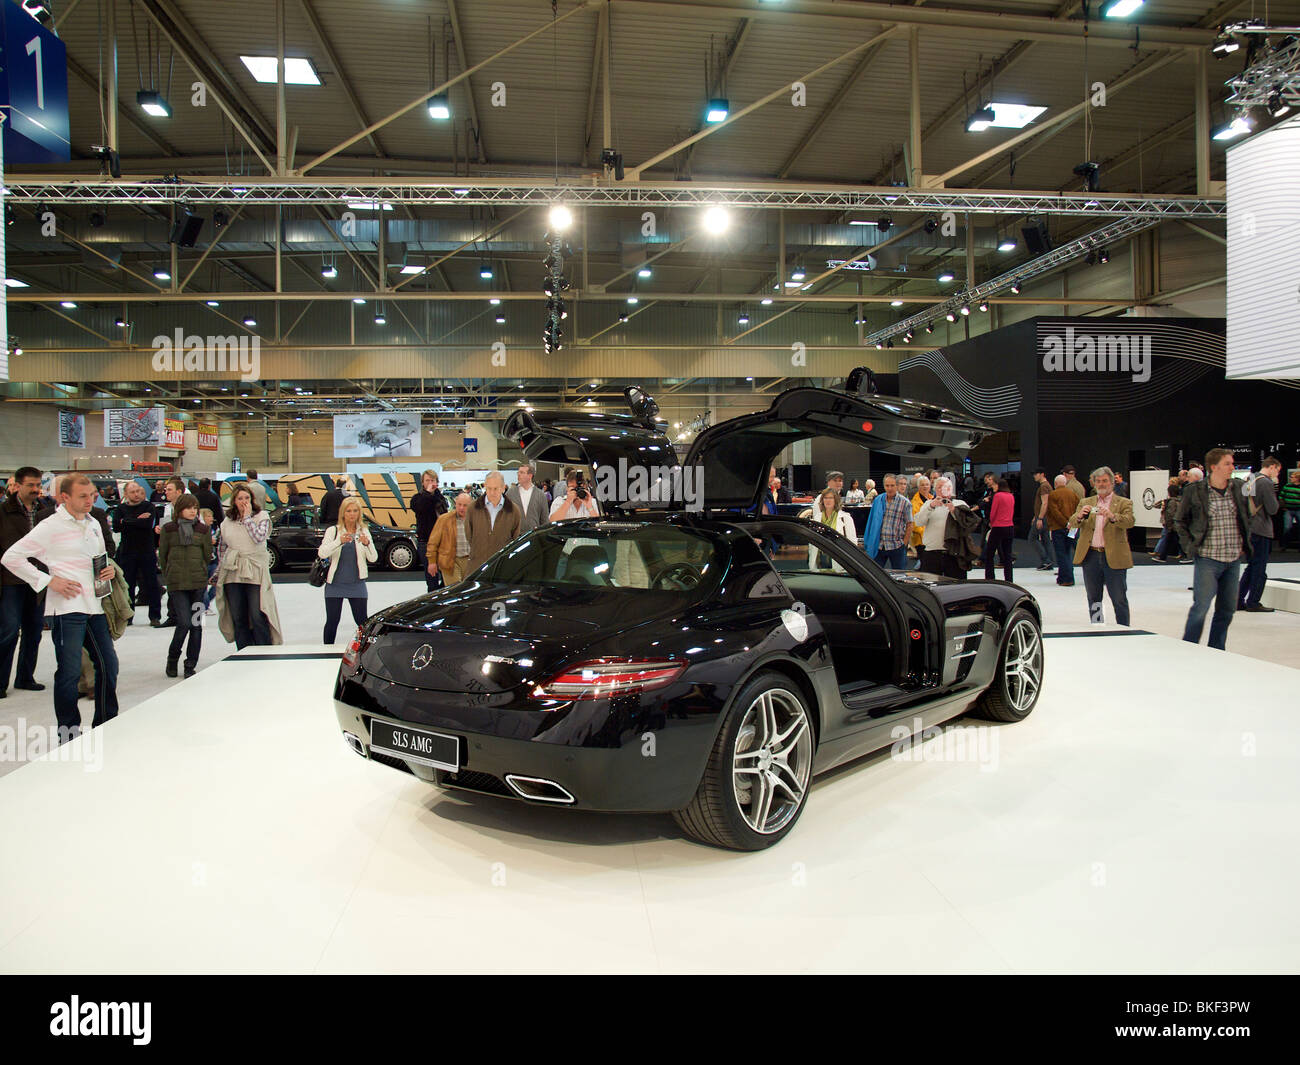 The new SLS AMG gullwing Mercedes on display at Techno Classica in Essen, Germany Stock Photo